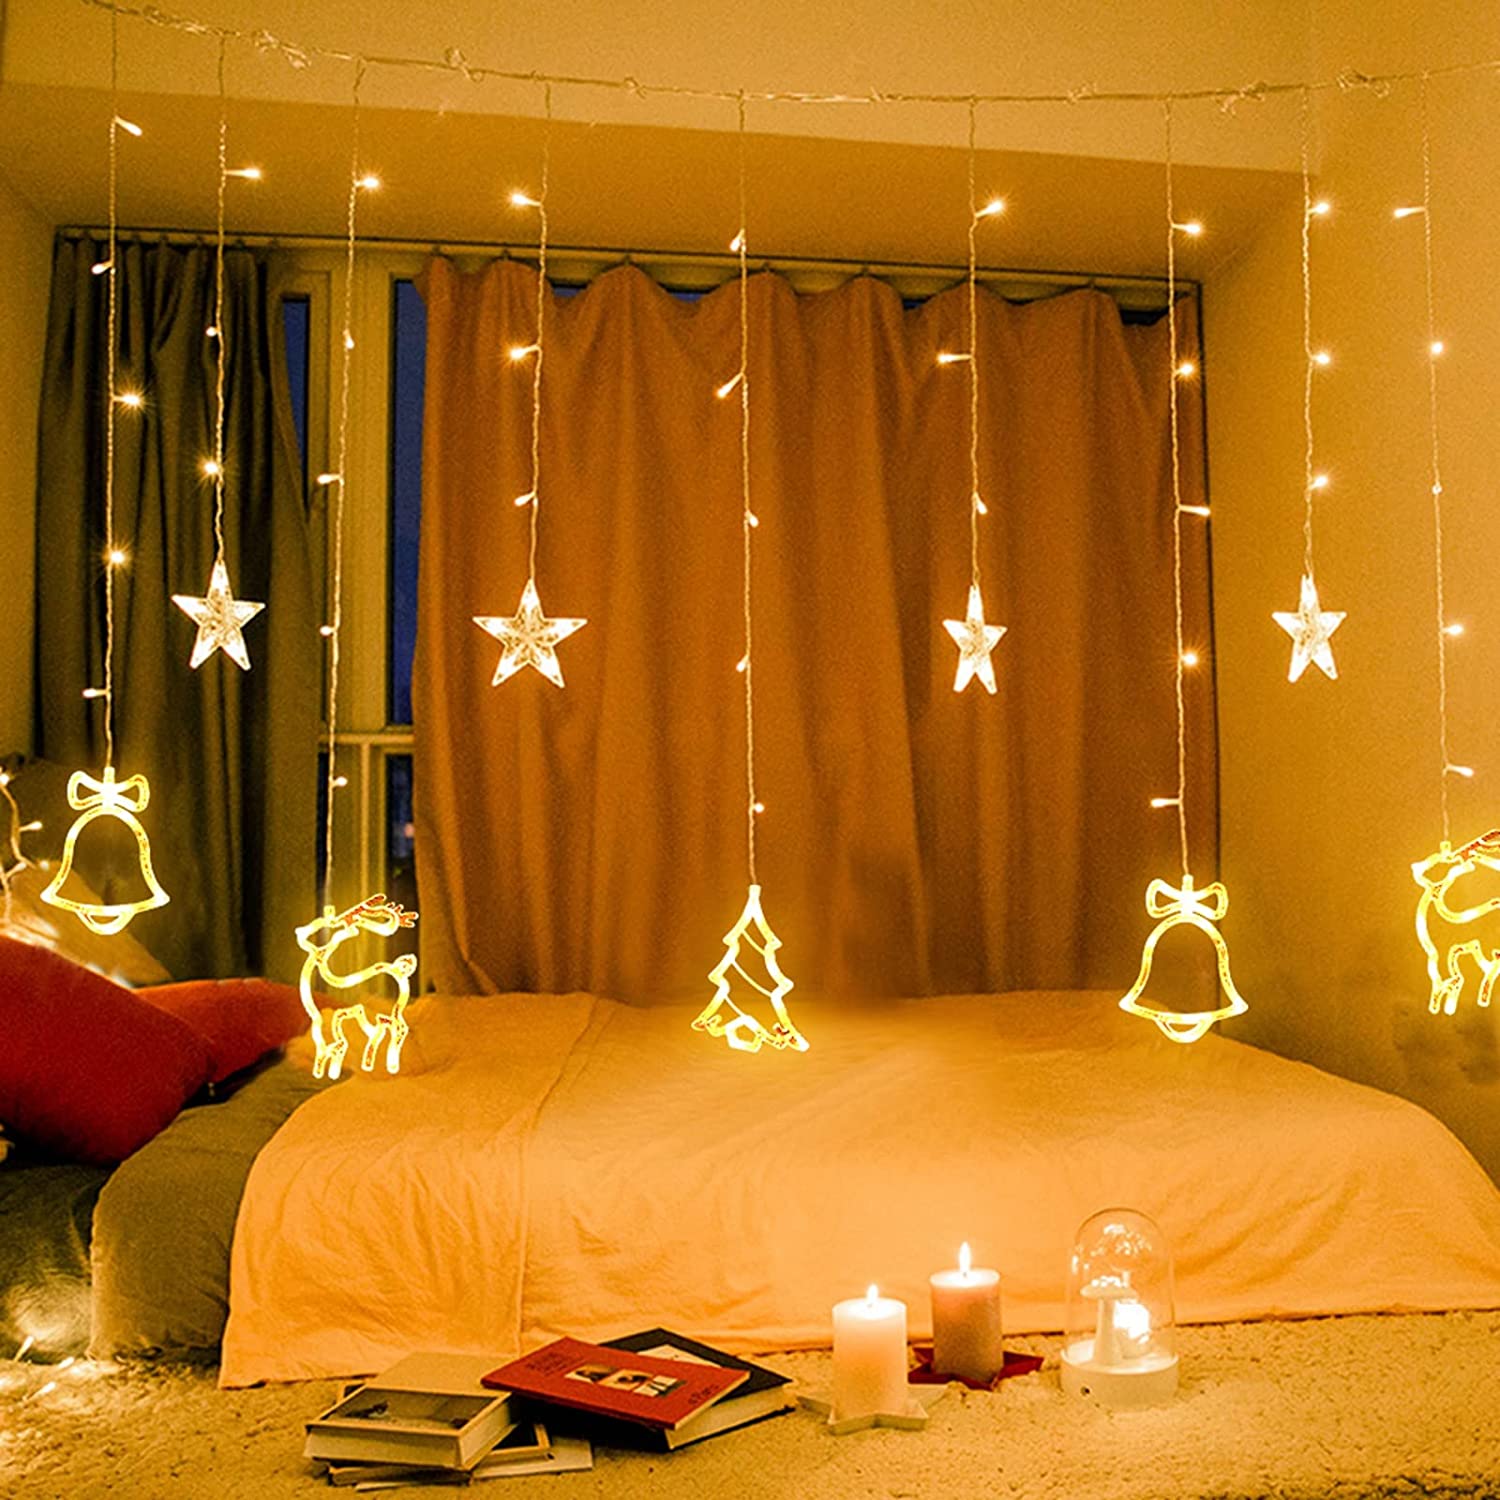 interGo 138 LED Light Curtain, LED Fairy Lights with Stars and Christmas Pattern, C